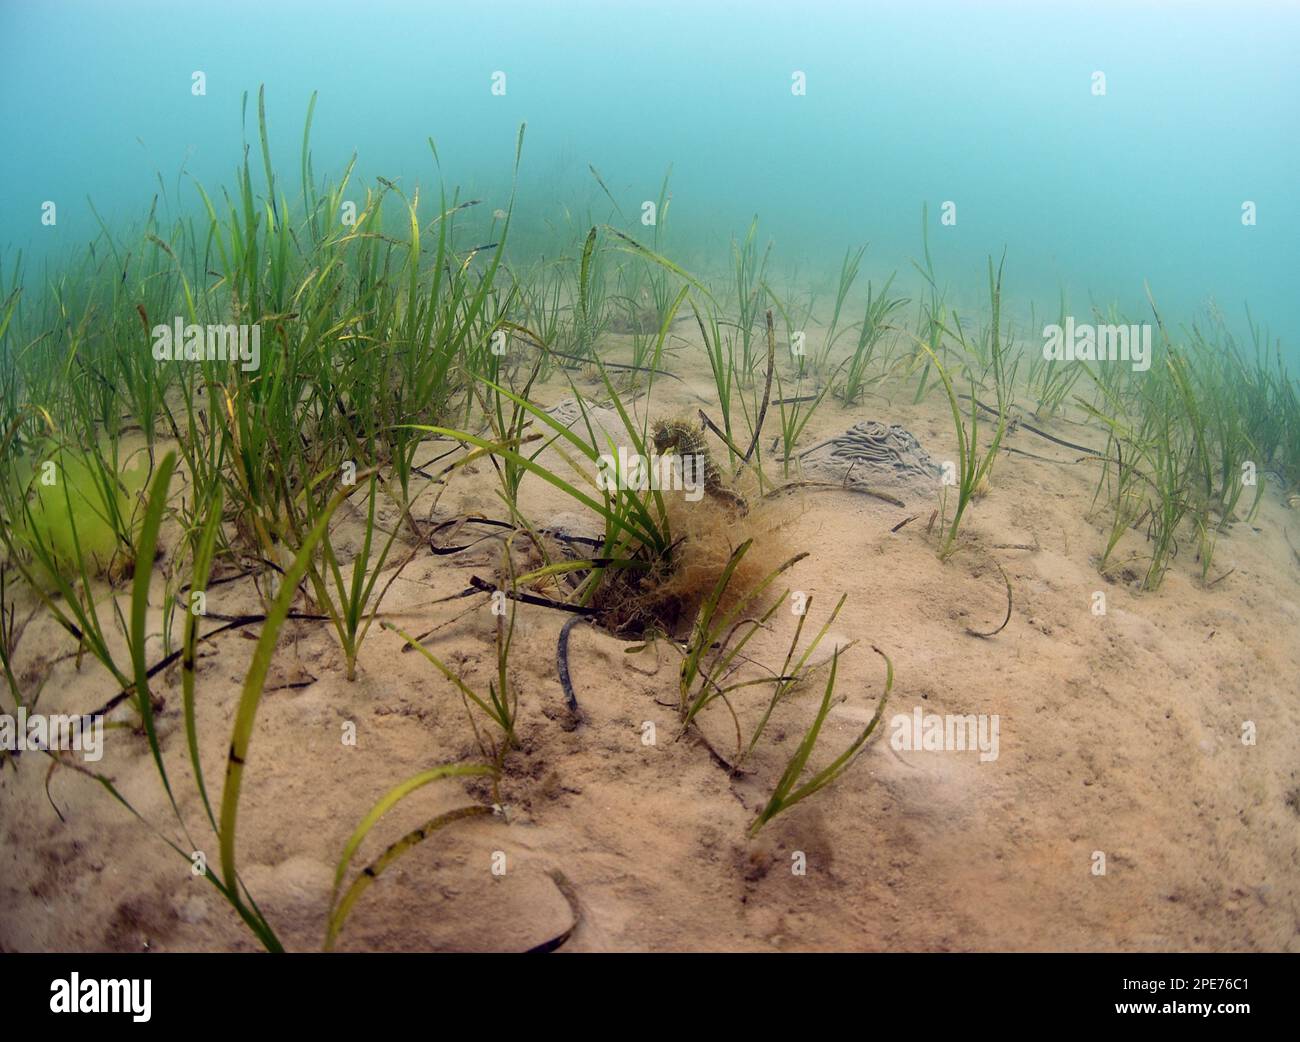 Long-snouted seahorse (Hippocampus guttulatus) adult, in bed habitat of seagrass (Zostera marina), Studland Bay, Isle of Purbeck, Dorset, England Stock Photo